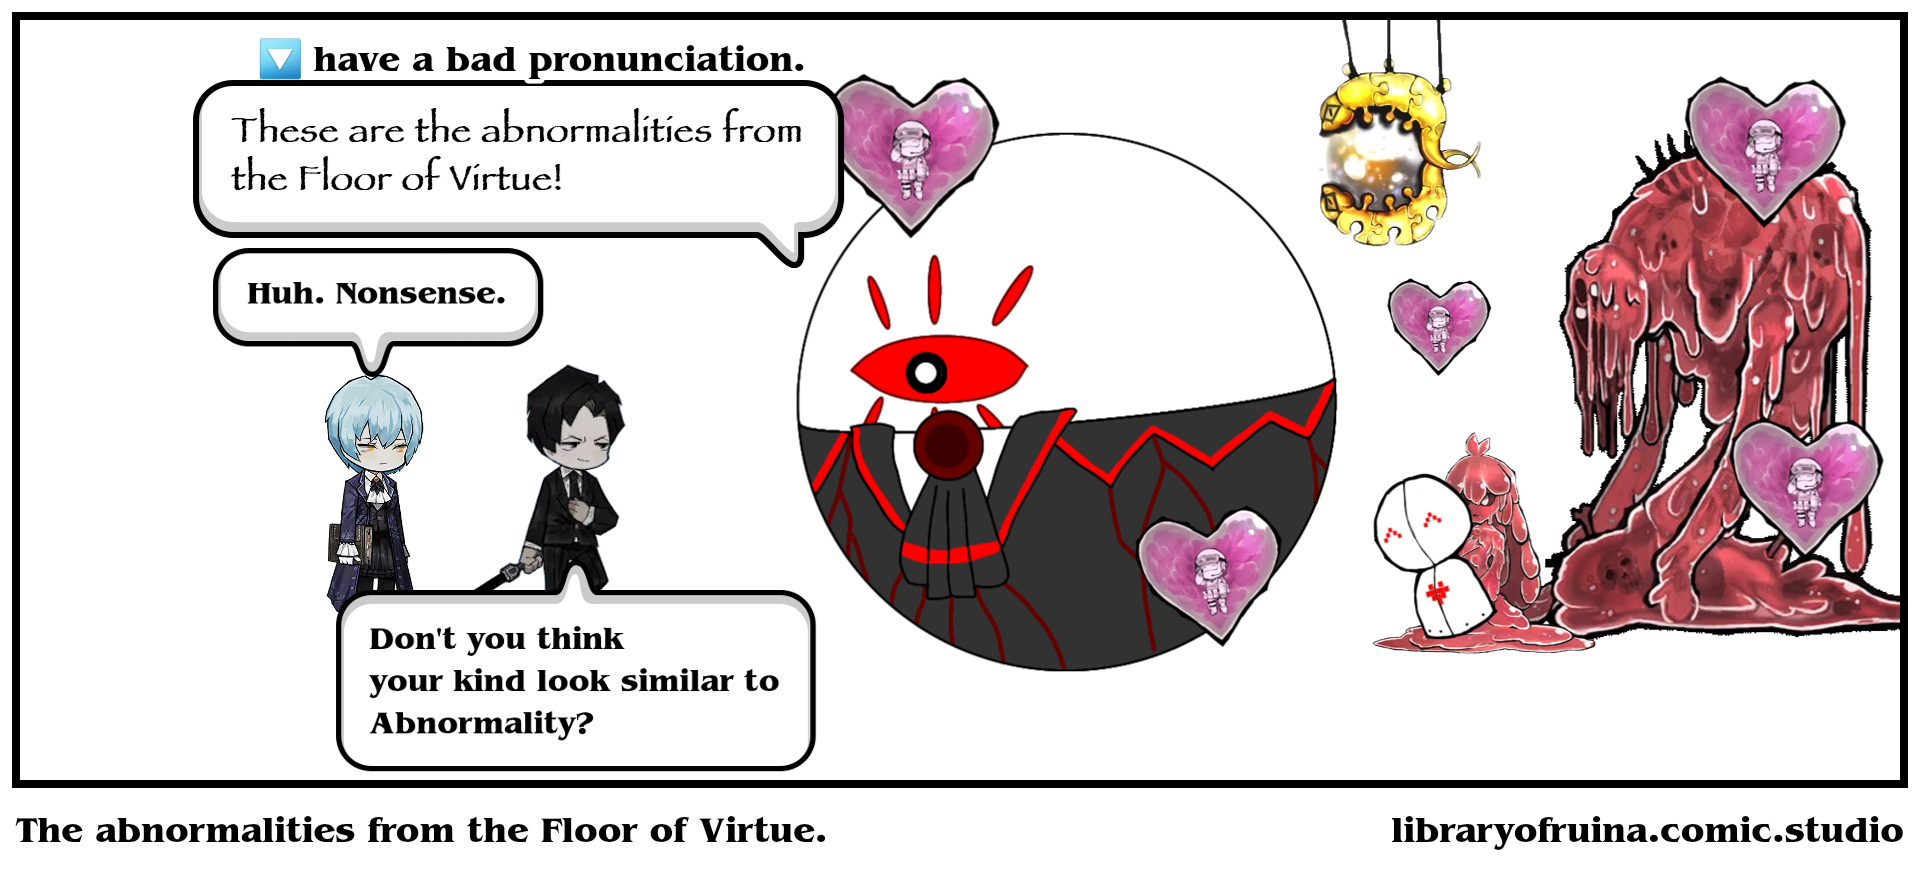 The abnormalities from the Floor of Virtue.